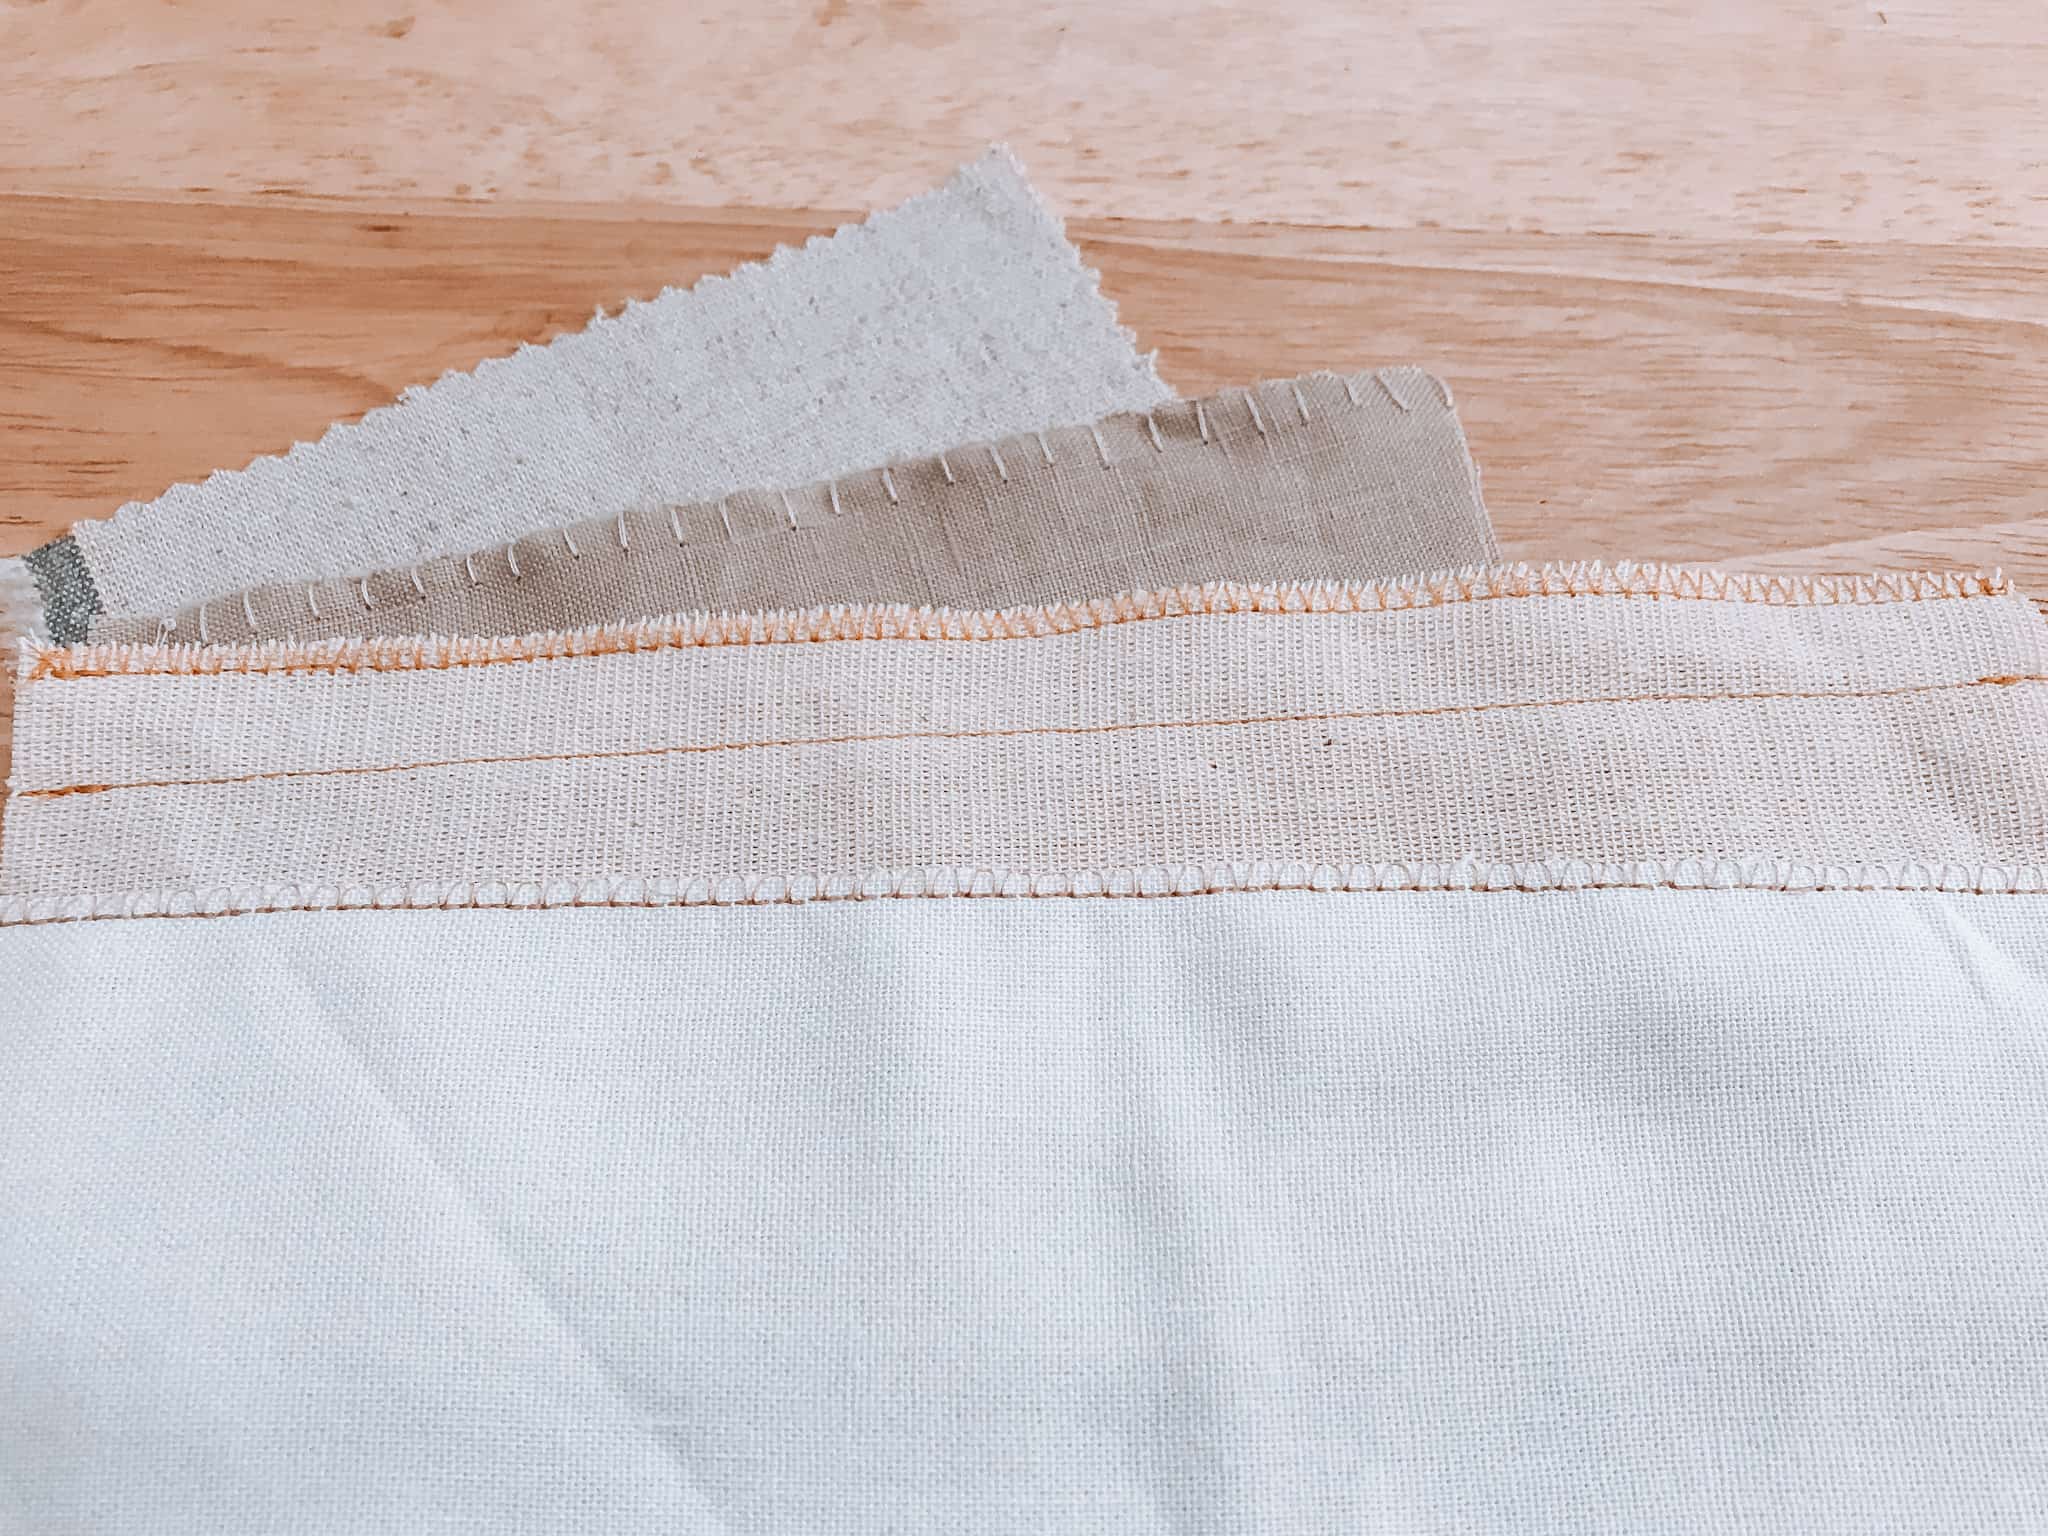 serving without a serger and overlock stitch by hand